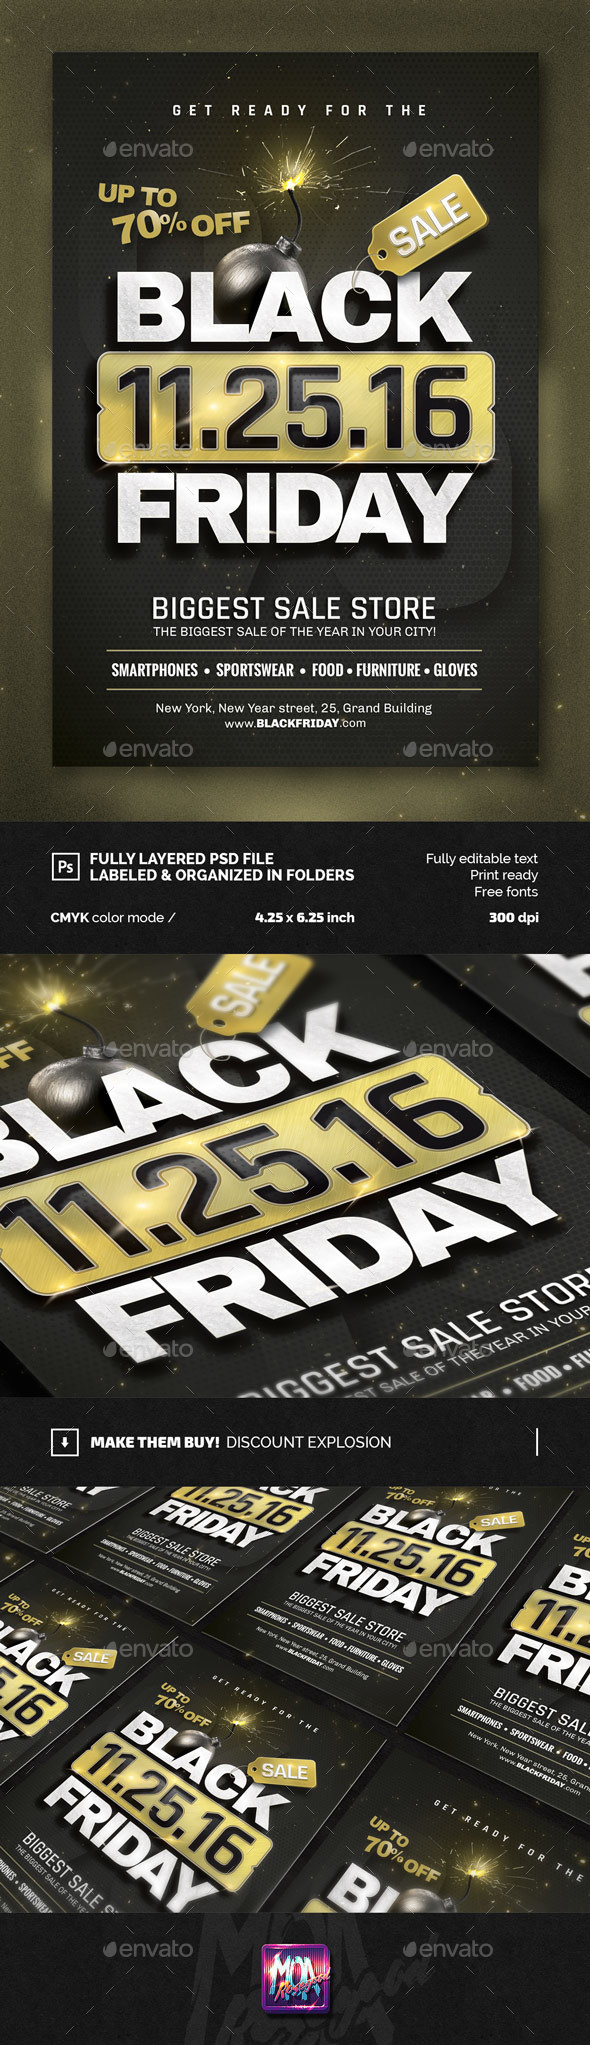 Black Friday flyer Template